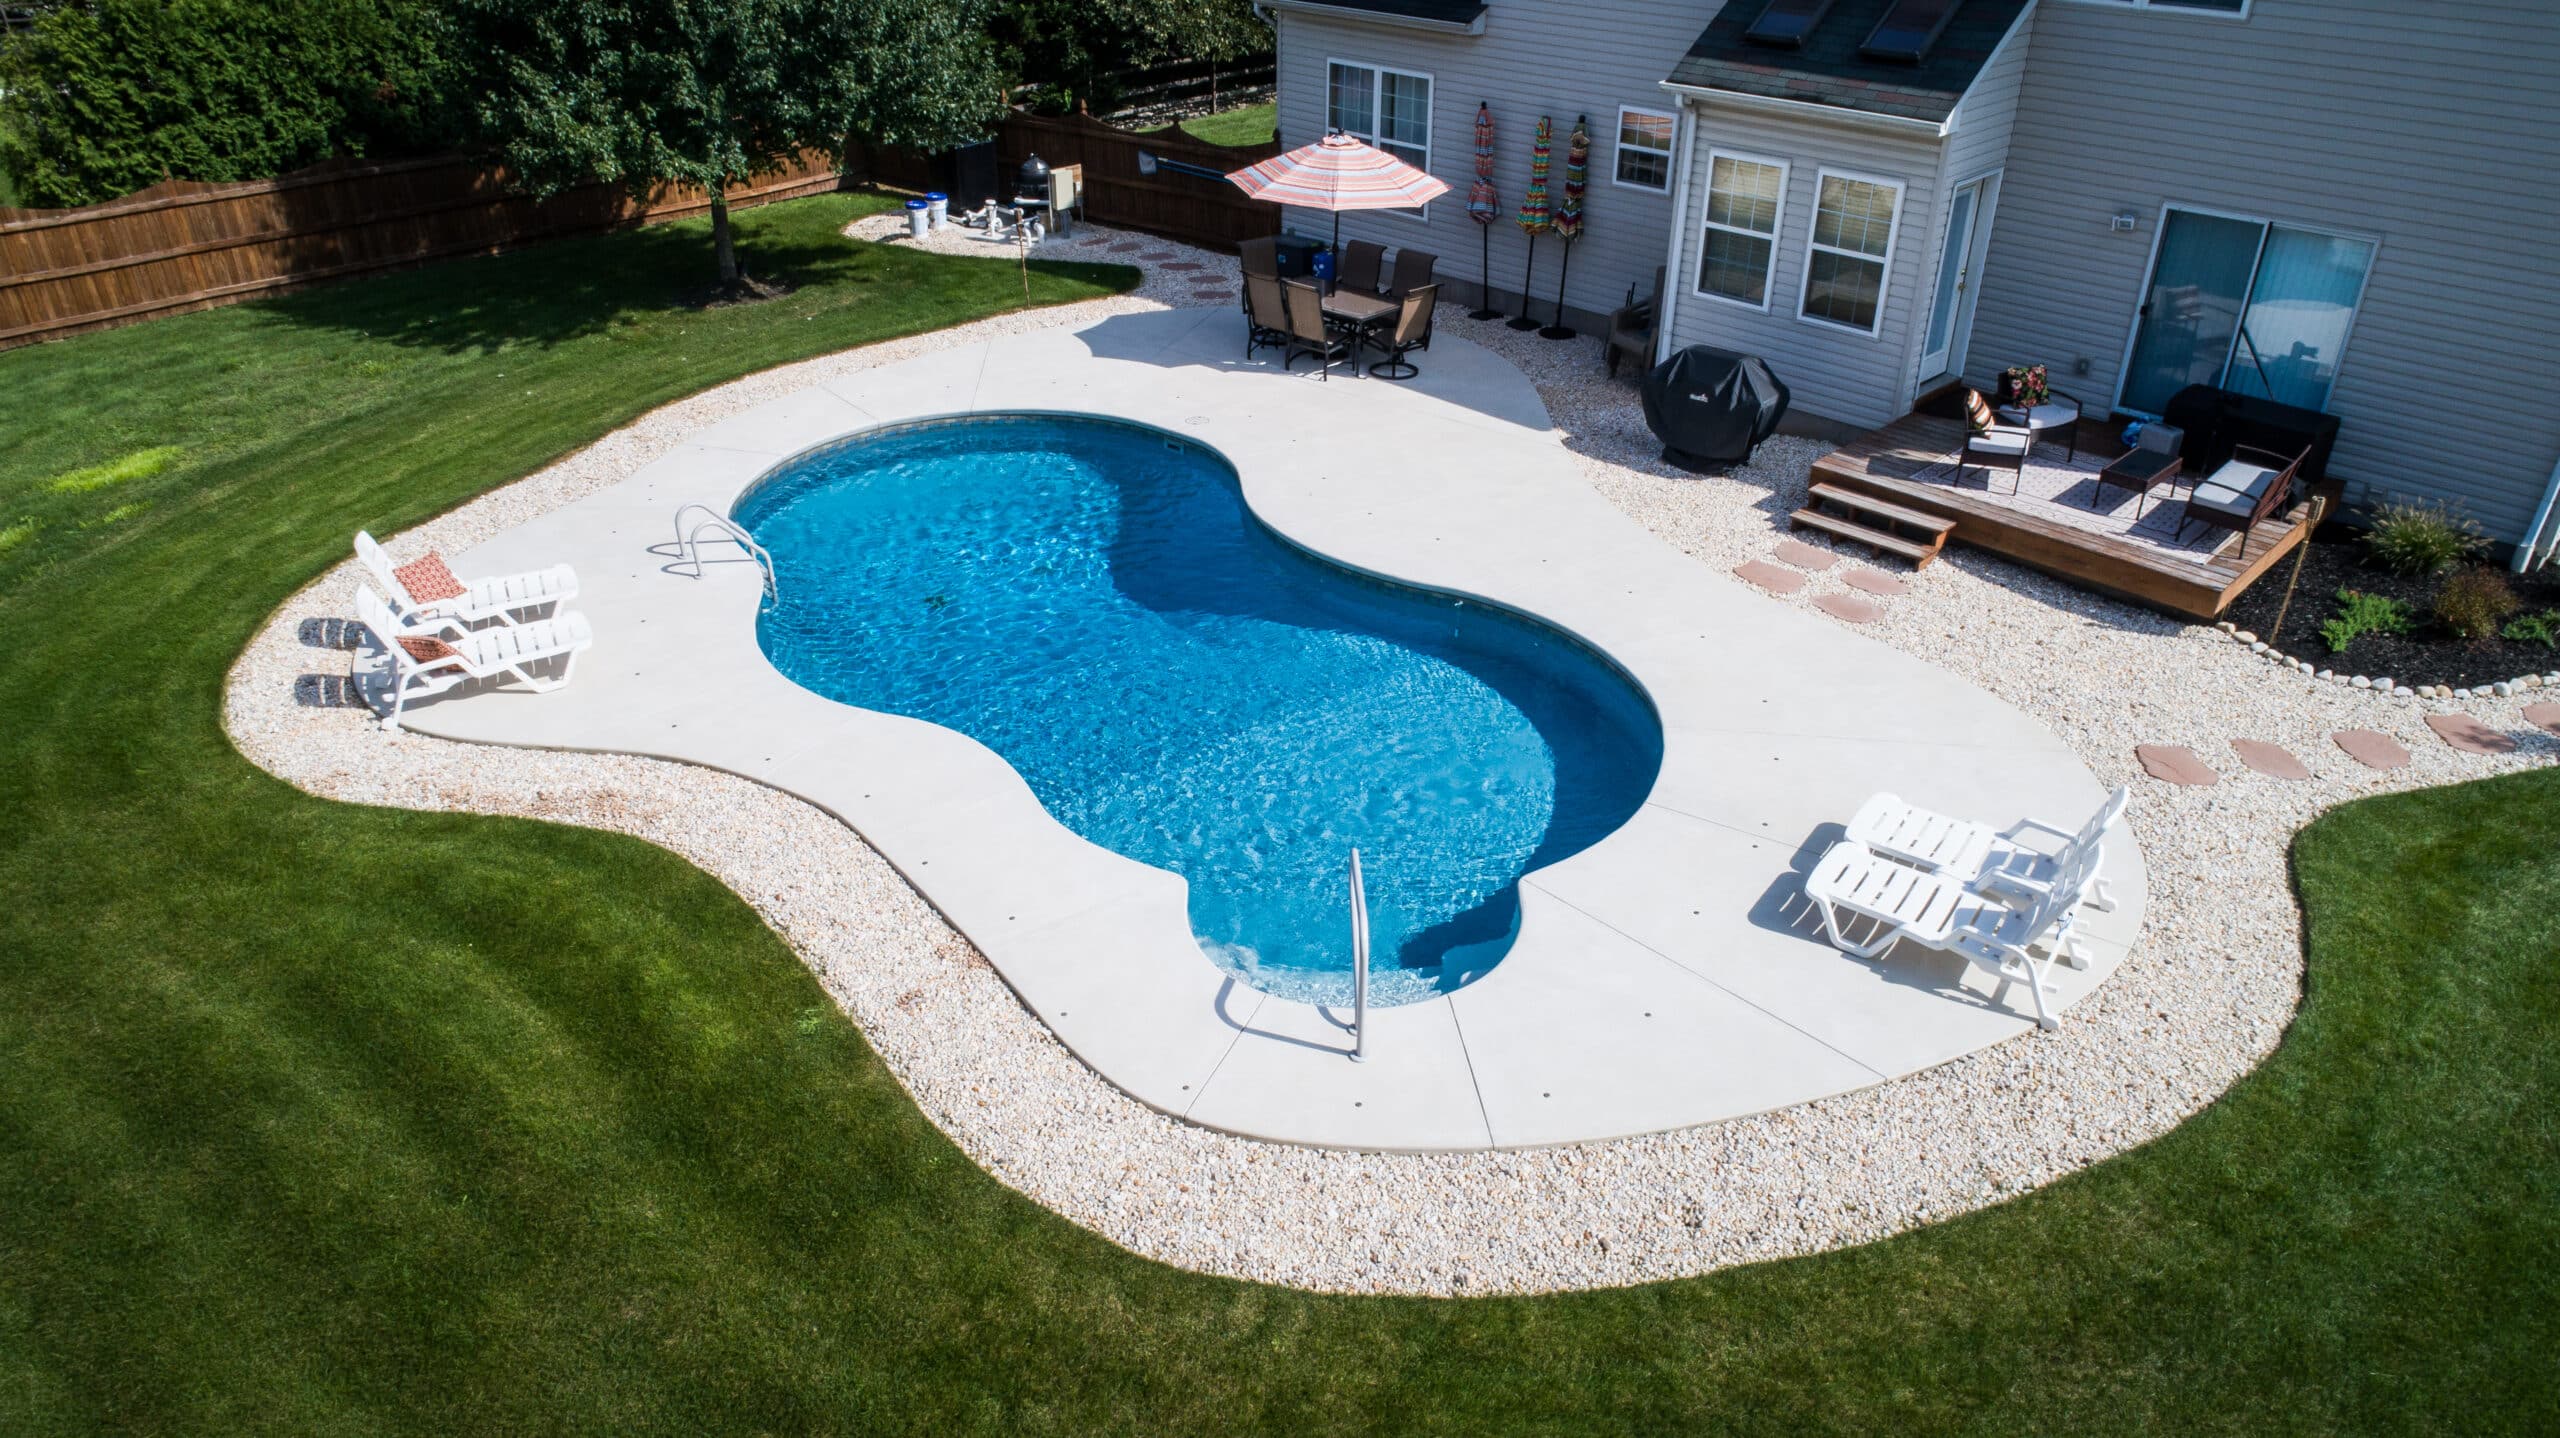 How much does it cost to heat an inground swimming pool?